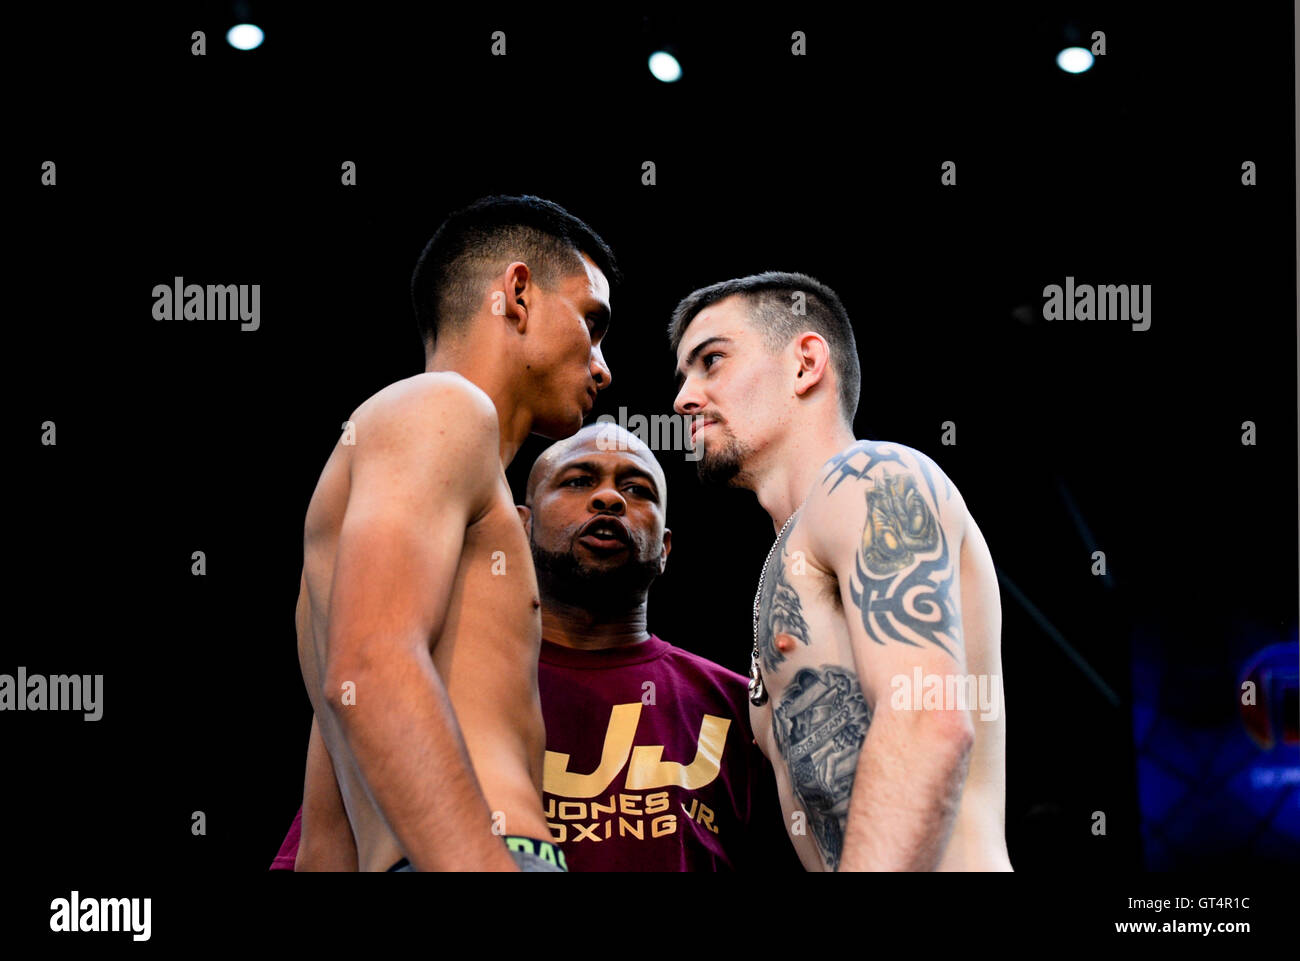 Las Vegas, Nevada September 8, 2016 -  The “Knockout Night at the D” series, presented by the D Las Vegas and DLVEC and is promoted by Roy Jones Jr. On the card, Randy Moreno (3-0), of Las Vegas, faces Gaige Ireland. The boxers facing off at the weigh-in before the fight. Credit:  Ken Howard/Alamy Live News Stock Photo